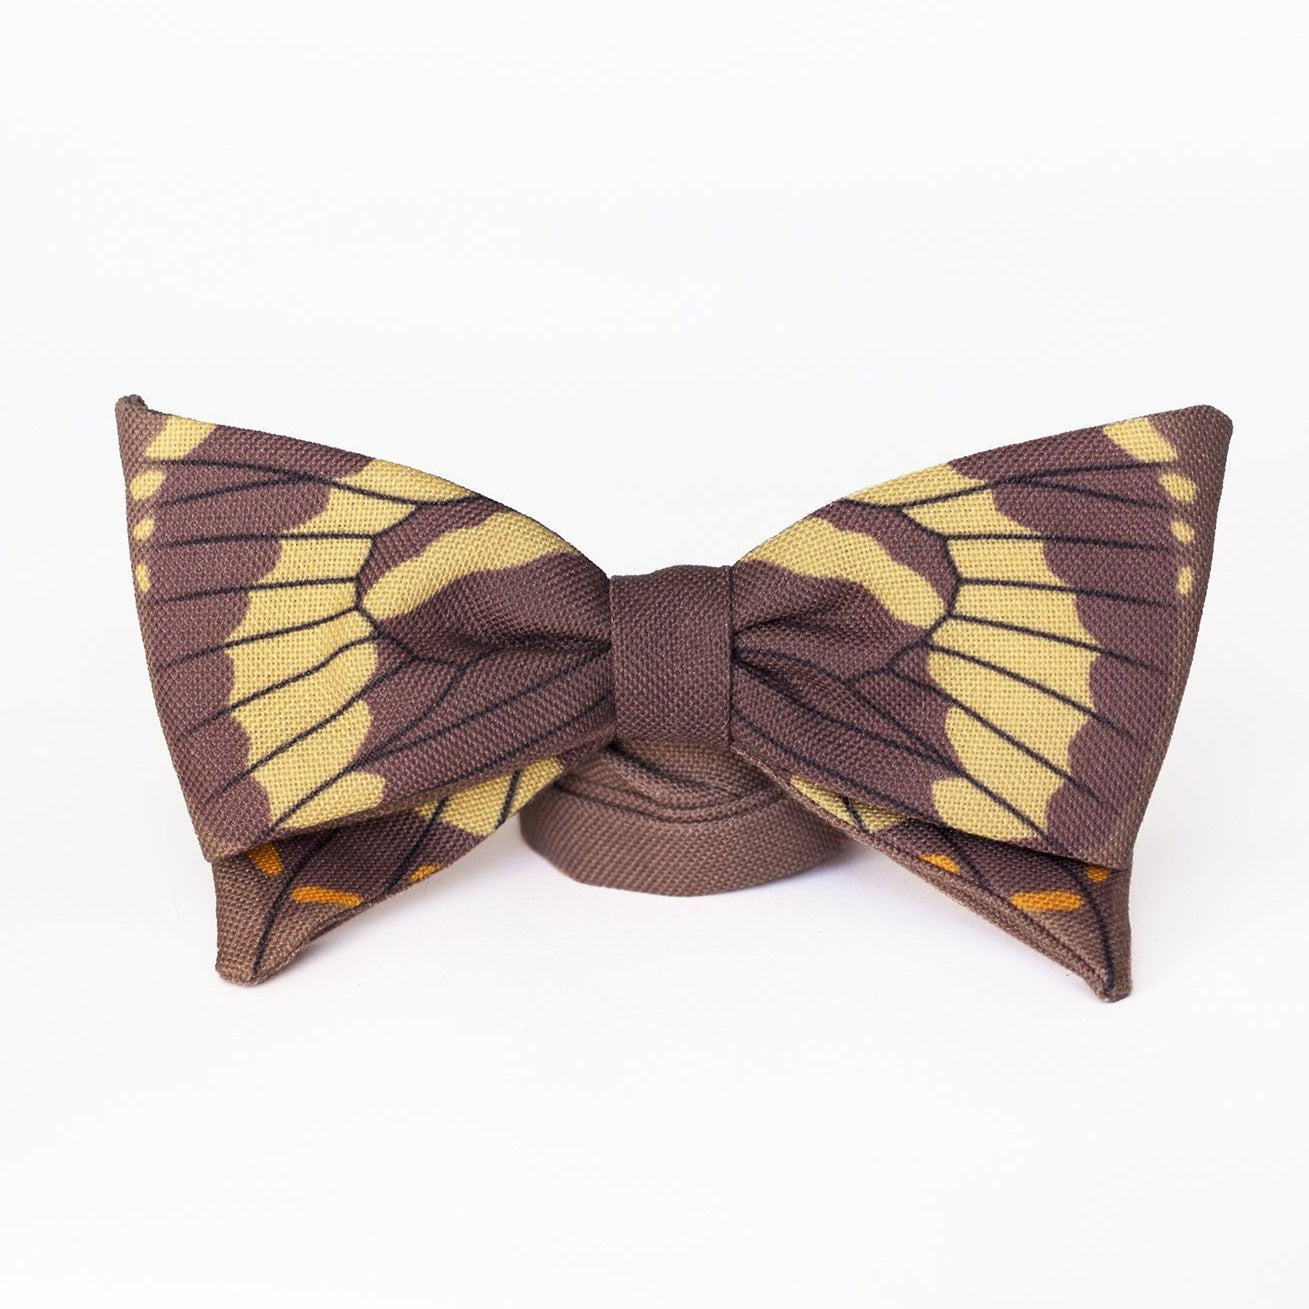 Unisex bow tie ULSTER